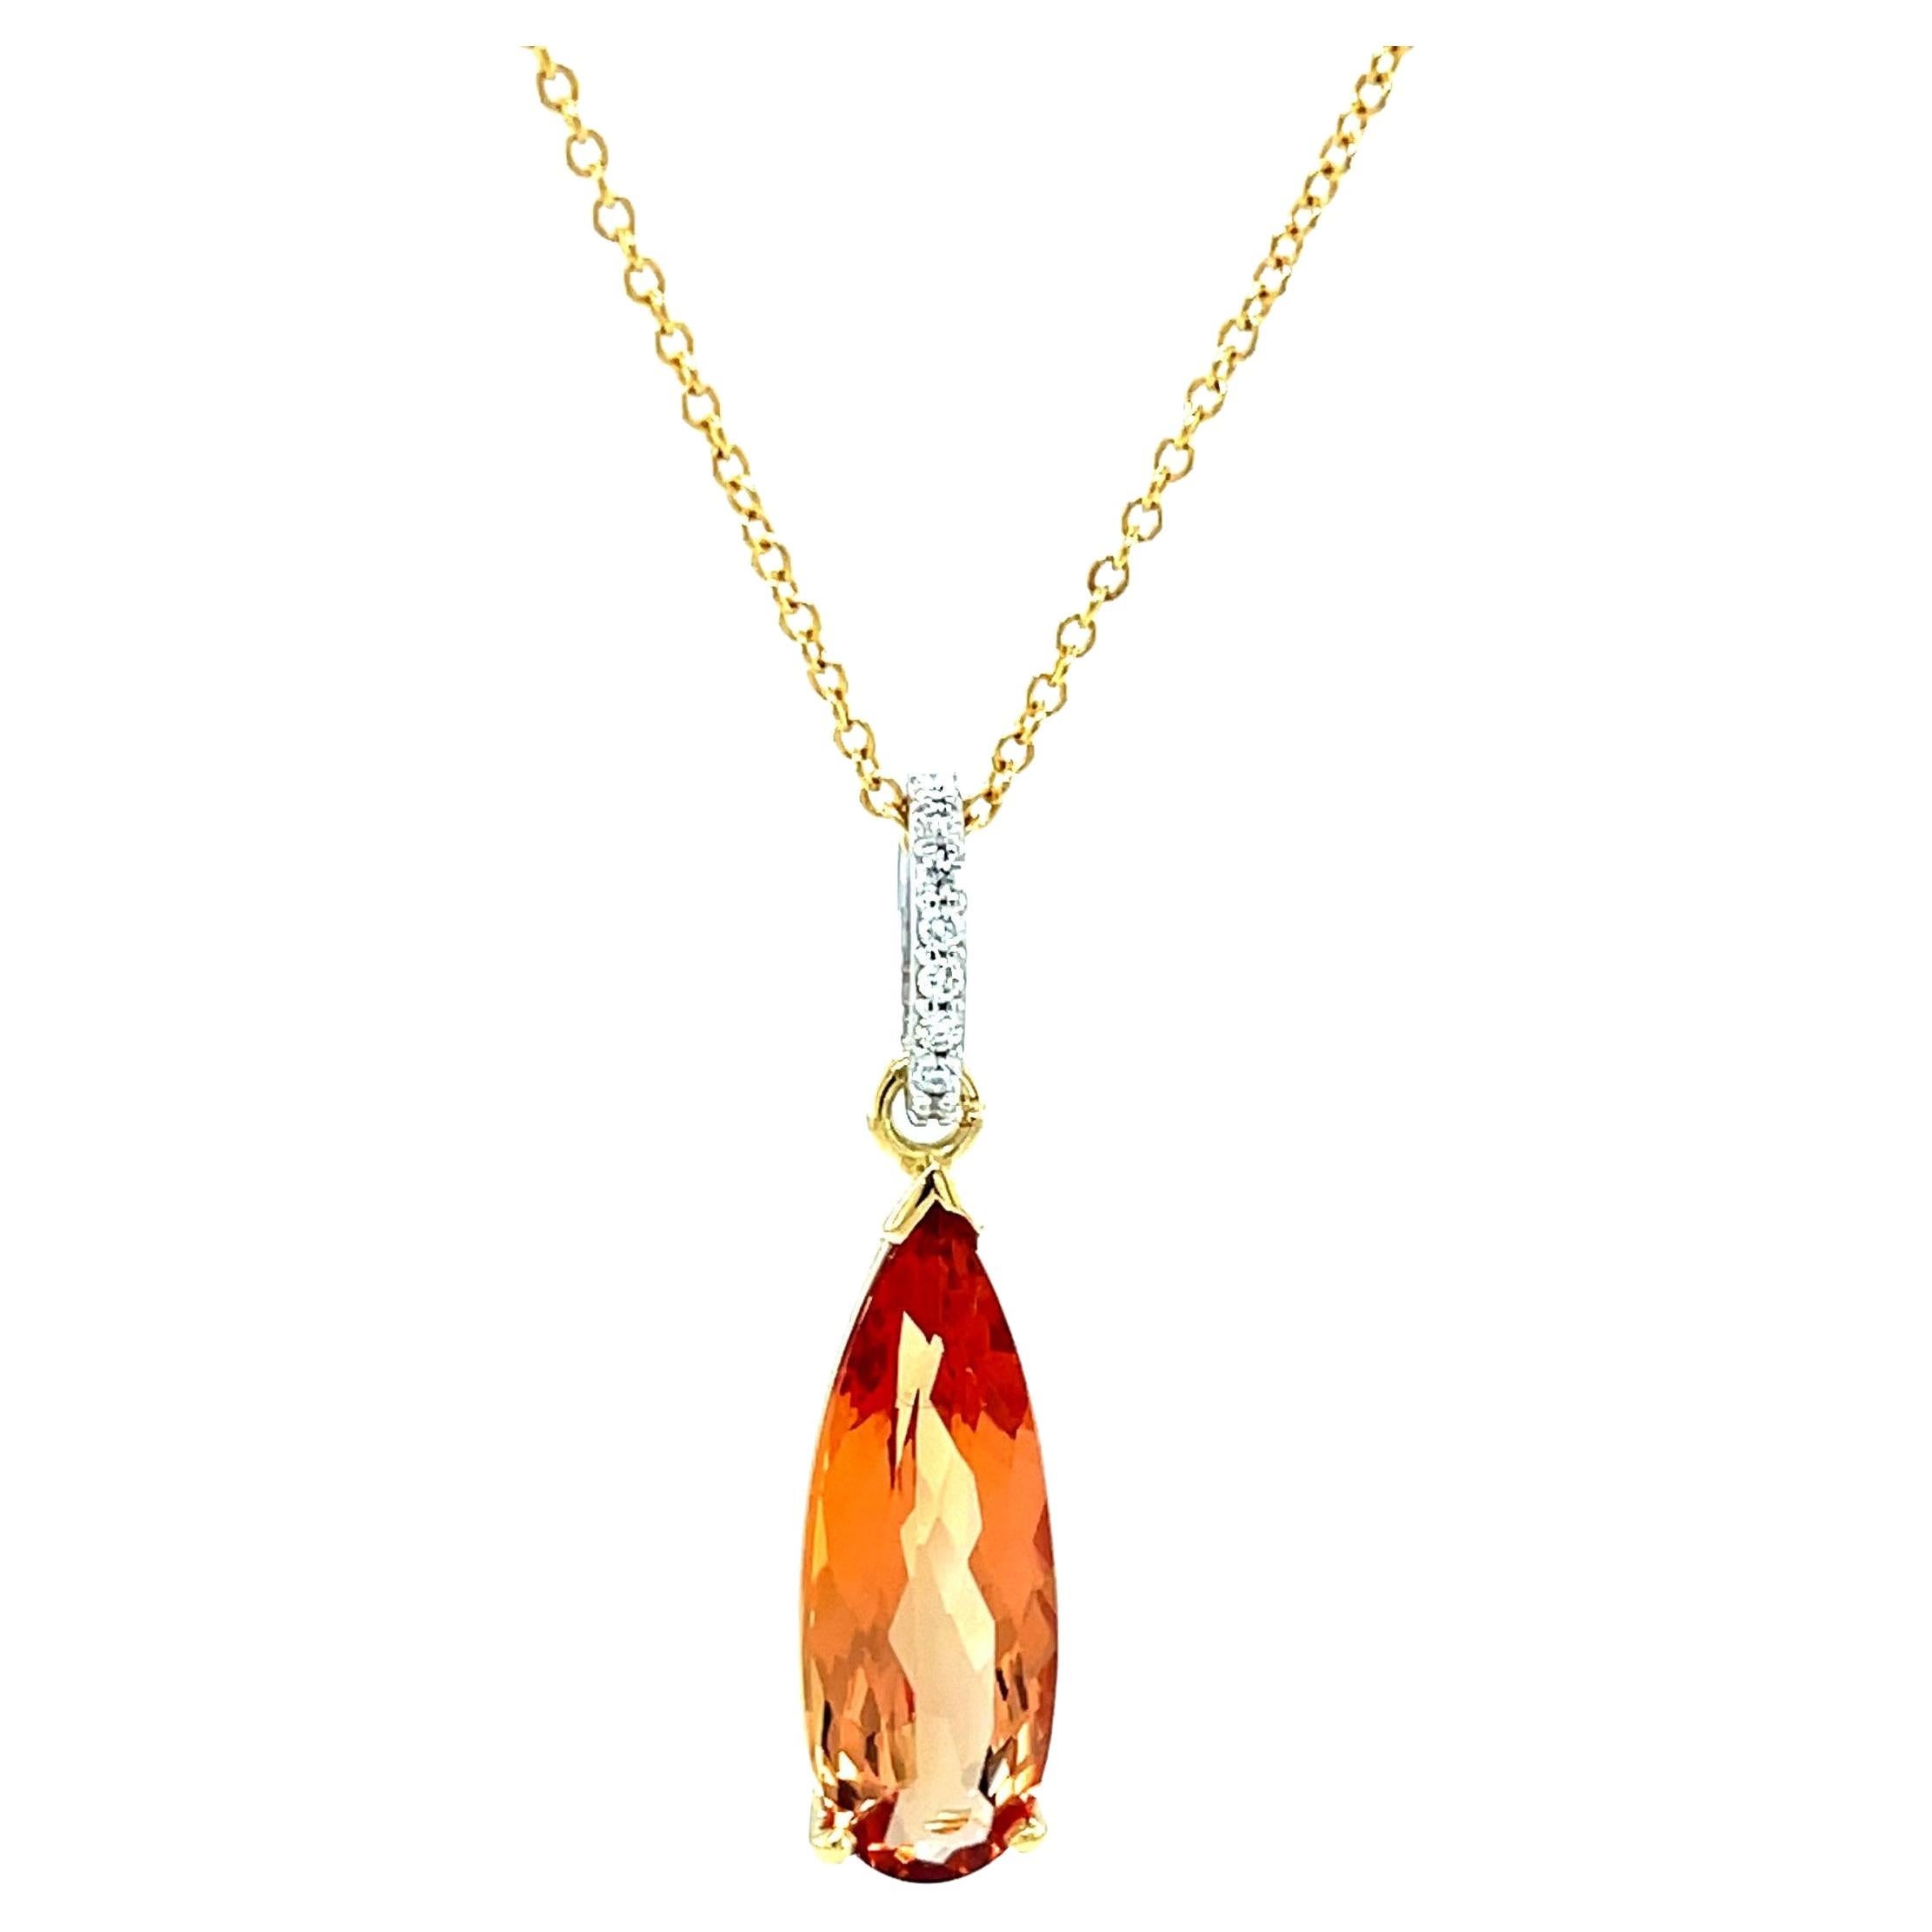 Imperial Topaz and Diamond Drop Necklace in White and Yellow Gold, 5.56 Carats